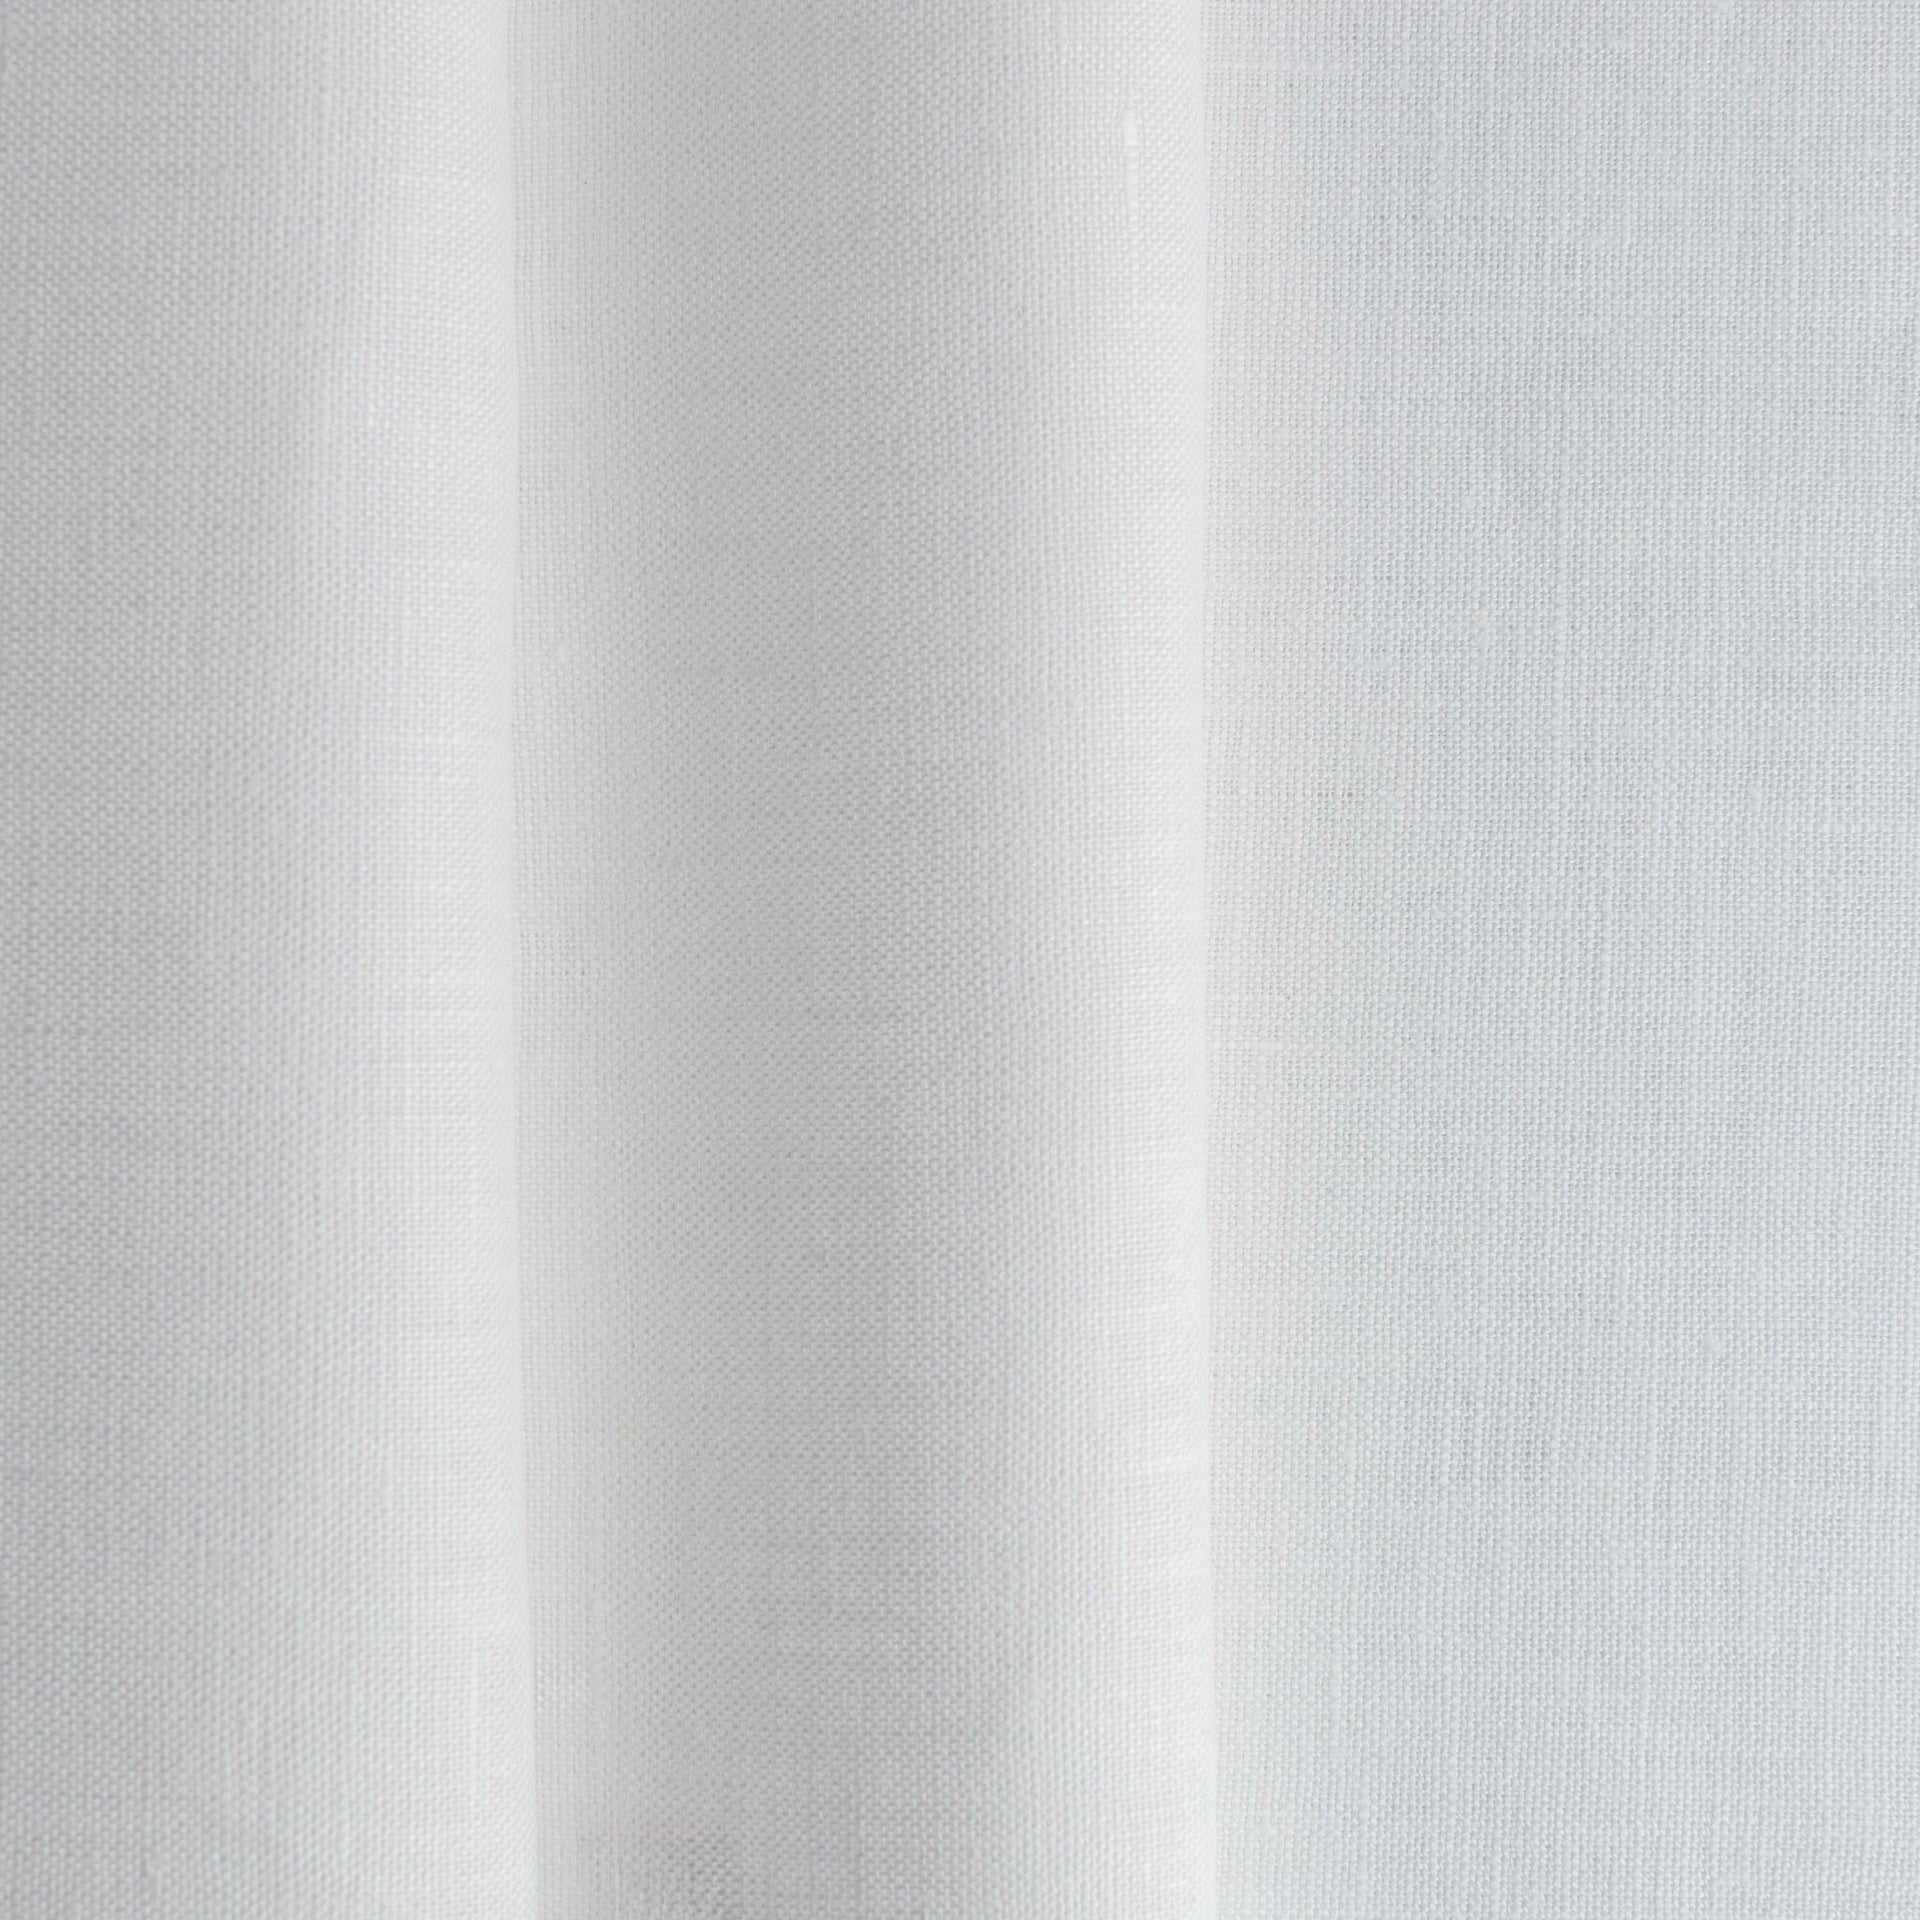 Off-White Medium Weight Linen Fabric by the Meter - 100% French Natural - Width 133 cm, 267 cm